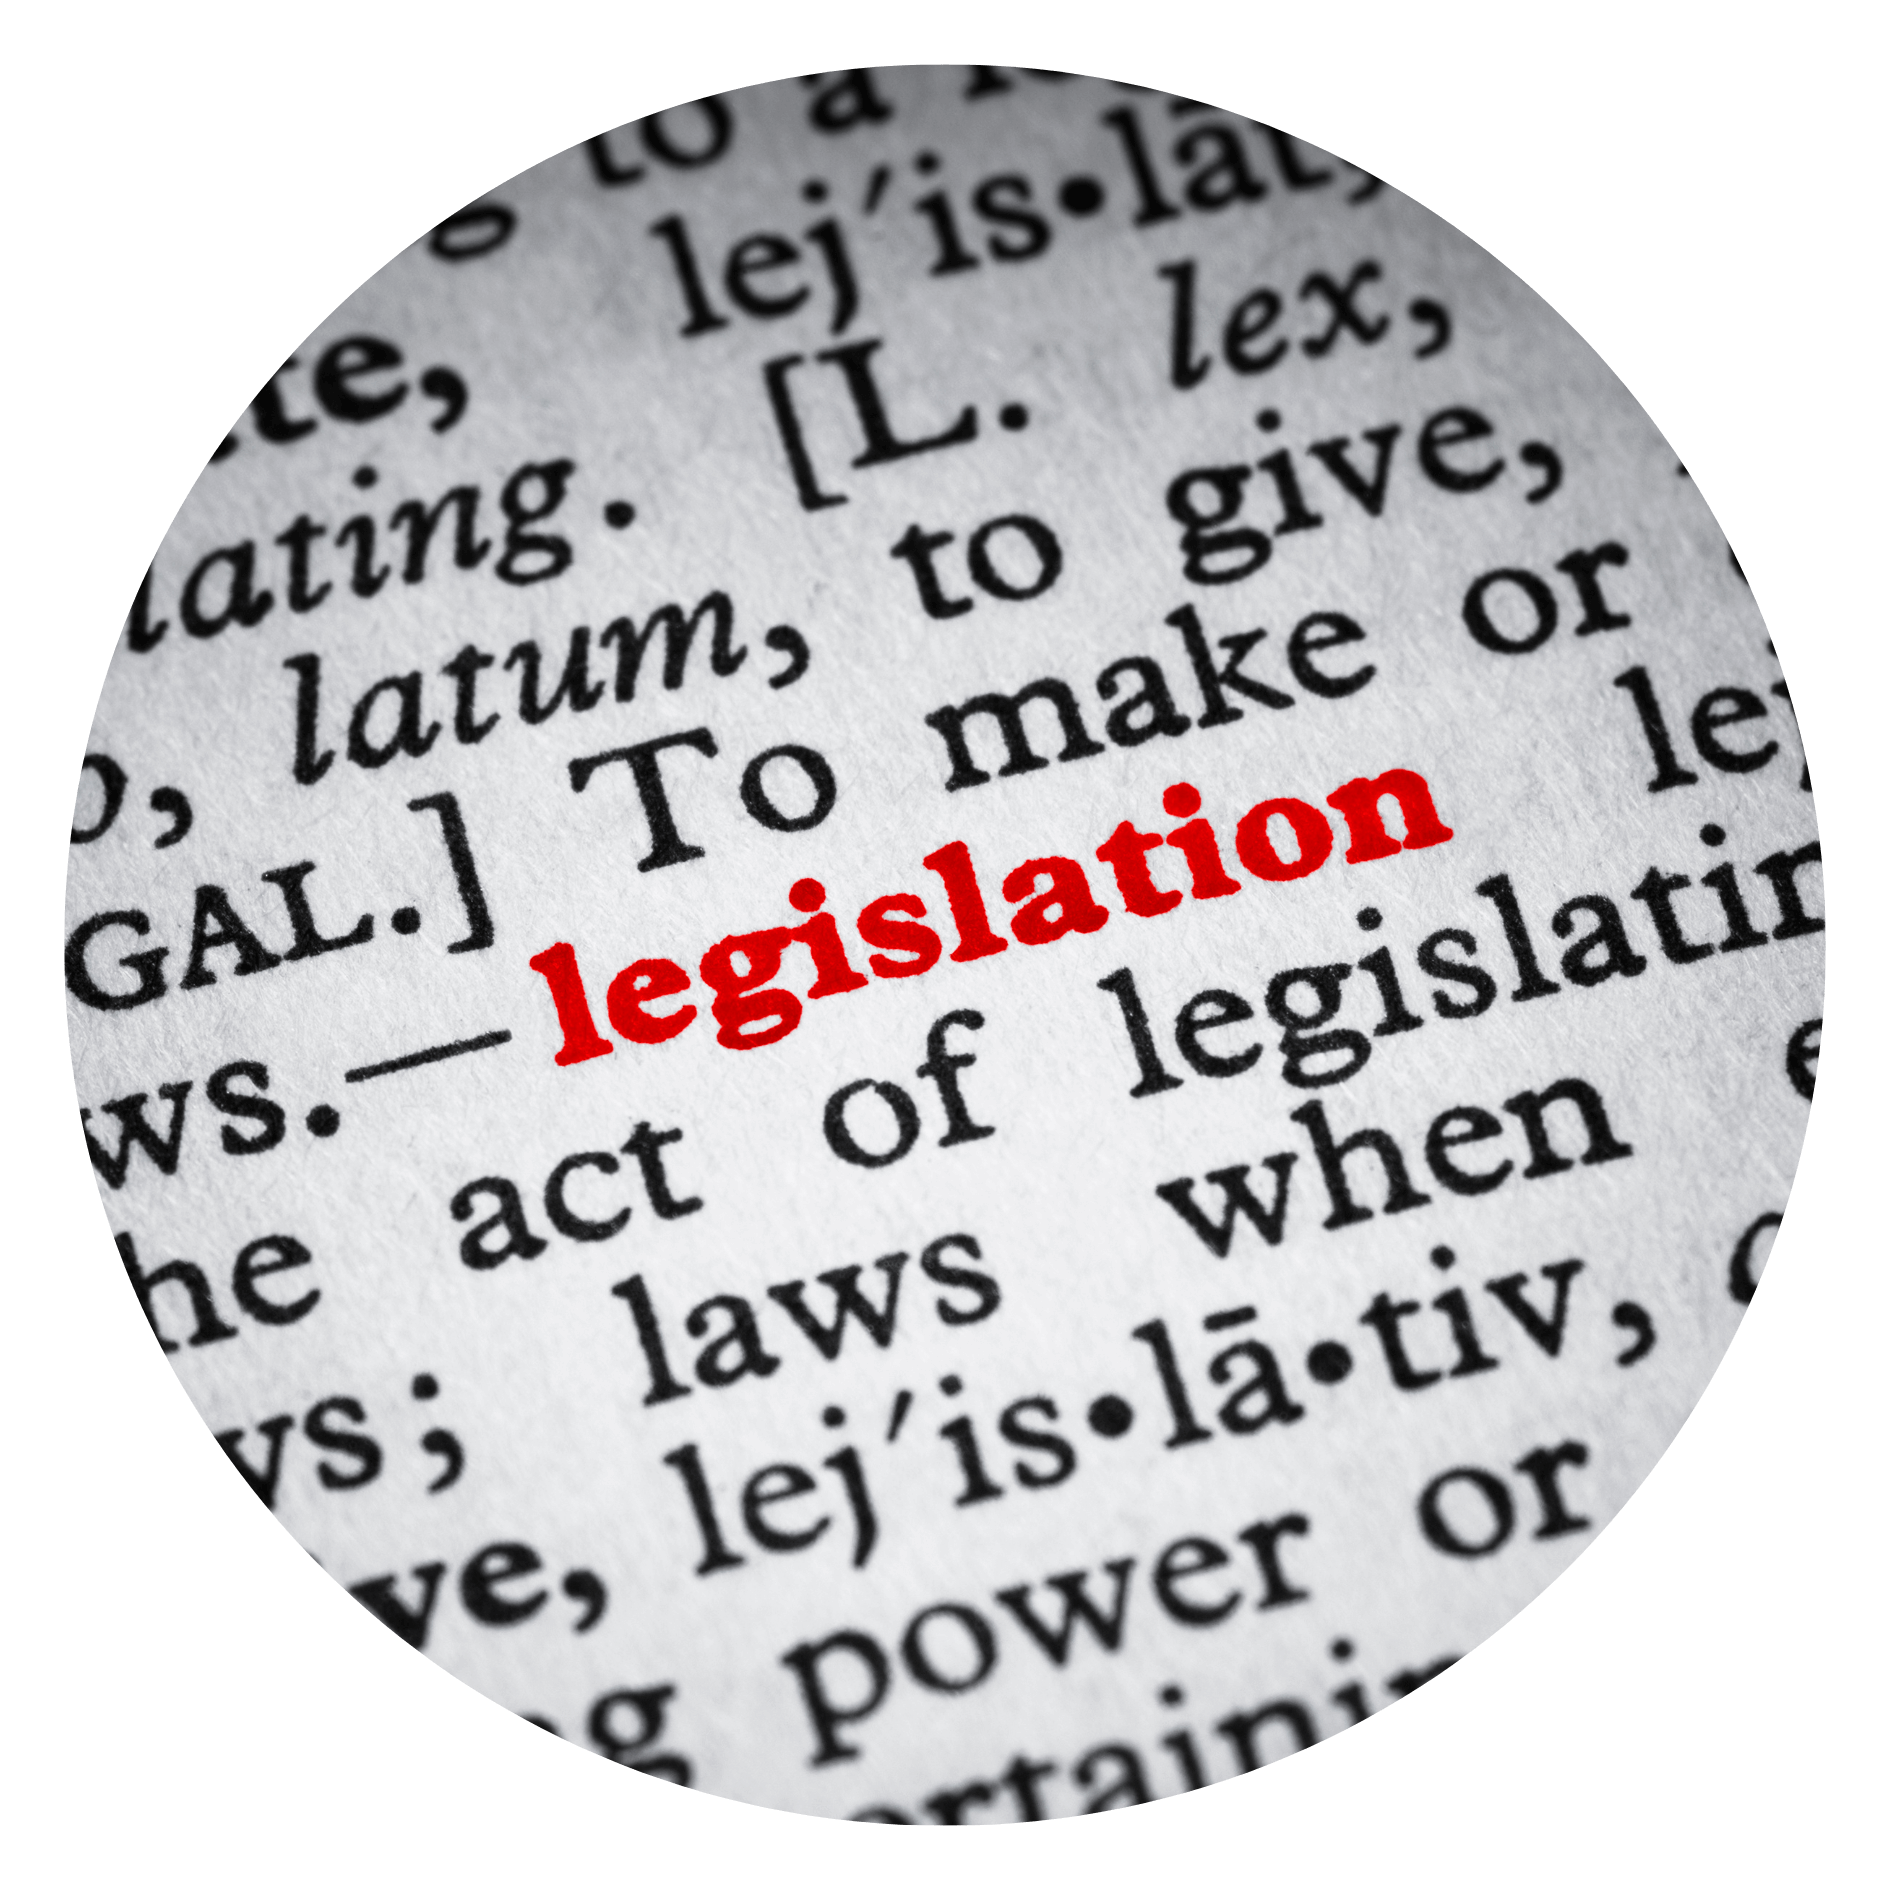 the word legislation in red among black text